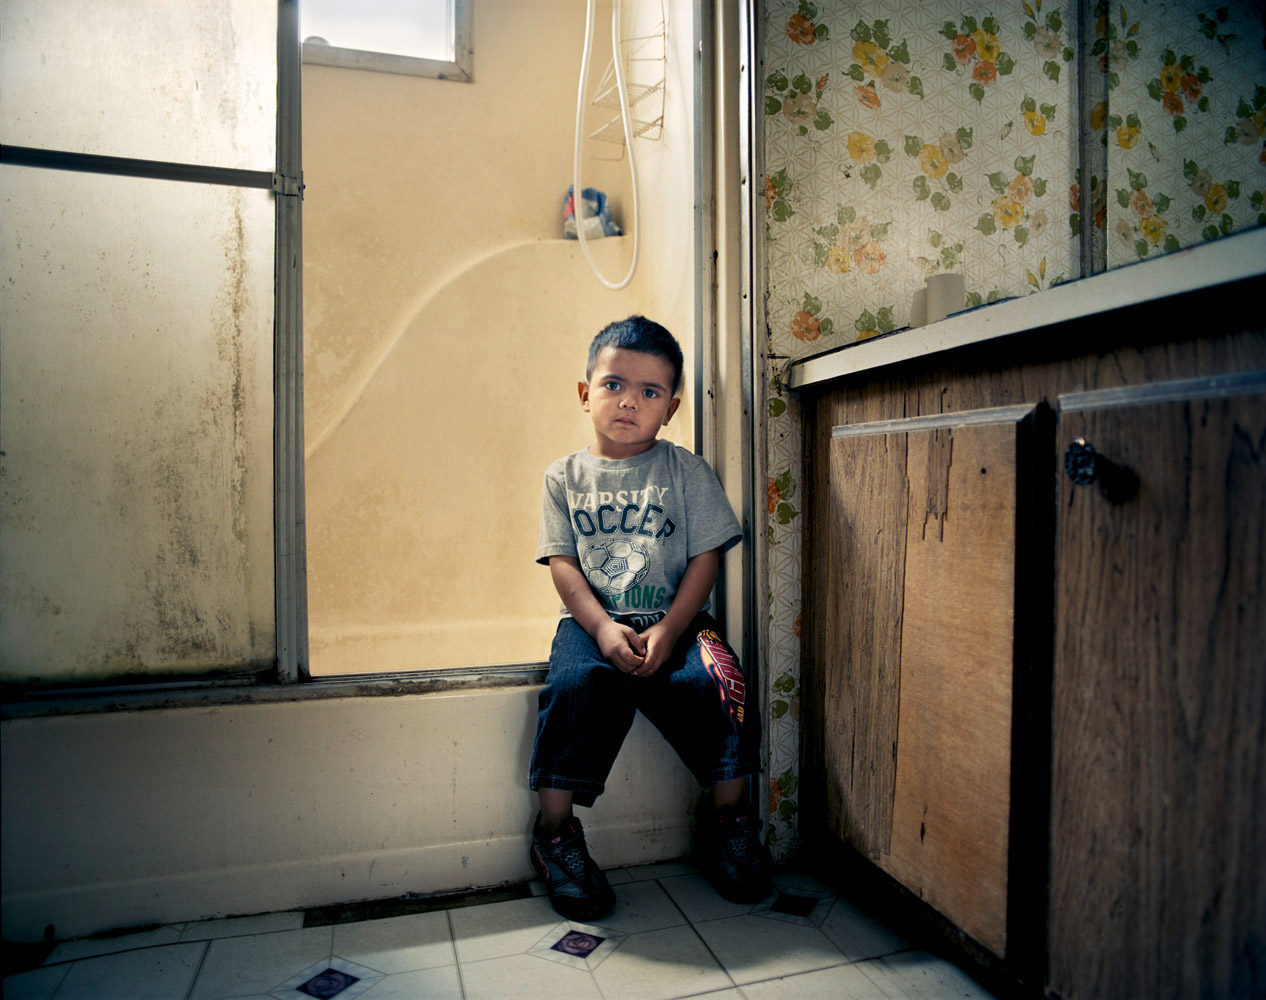 Joakim Eskildsen. From  Below The Line: Portraits of American Poverty.  Published on LightBox, November 17, 2011.
                              
                              Eric, 3, lives with two siblings, his mother and grandparents in a trailer park for migrant farm workers in Firebaugh, Calif. His grandmother regularly walks two miles with him to pick up free food from the local community center to supplement the family’s $350/week income. June 1, 2011.